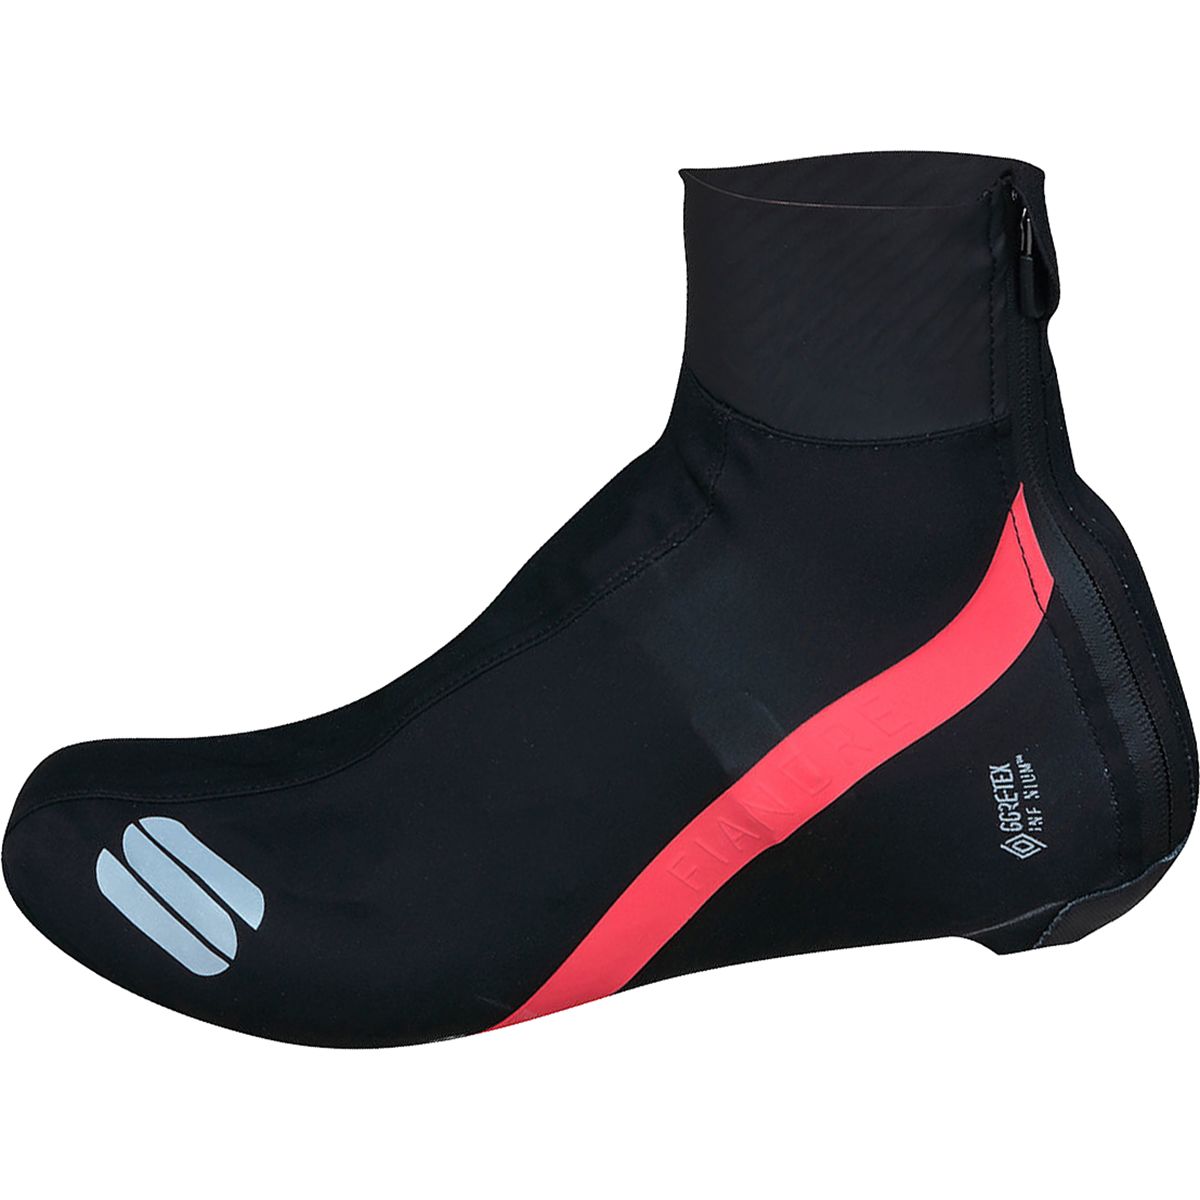 Best cycling overshoes 2021 